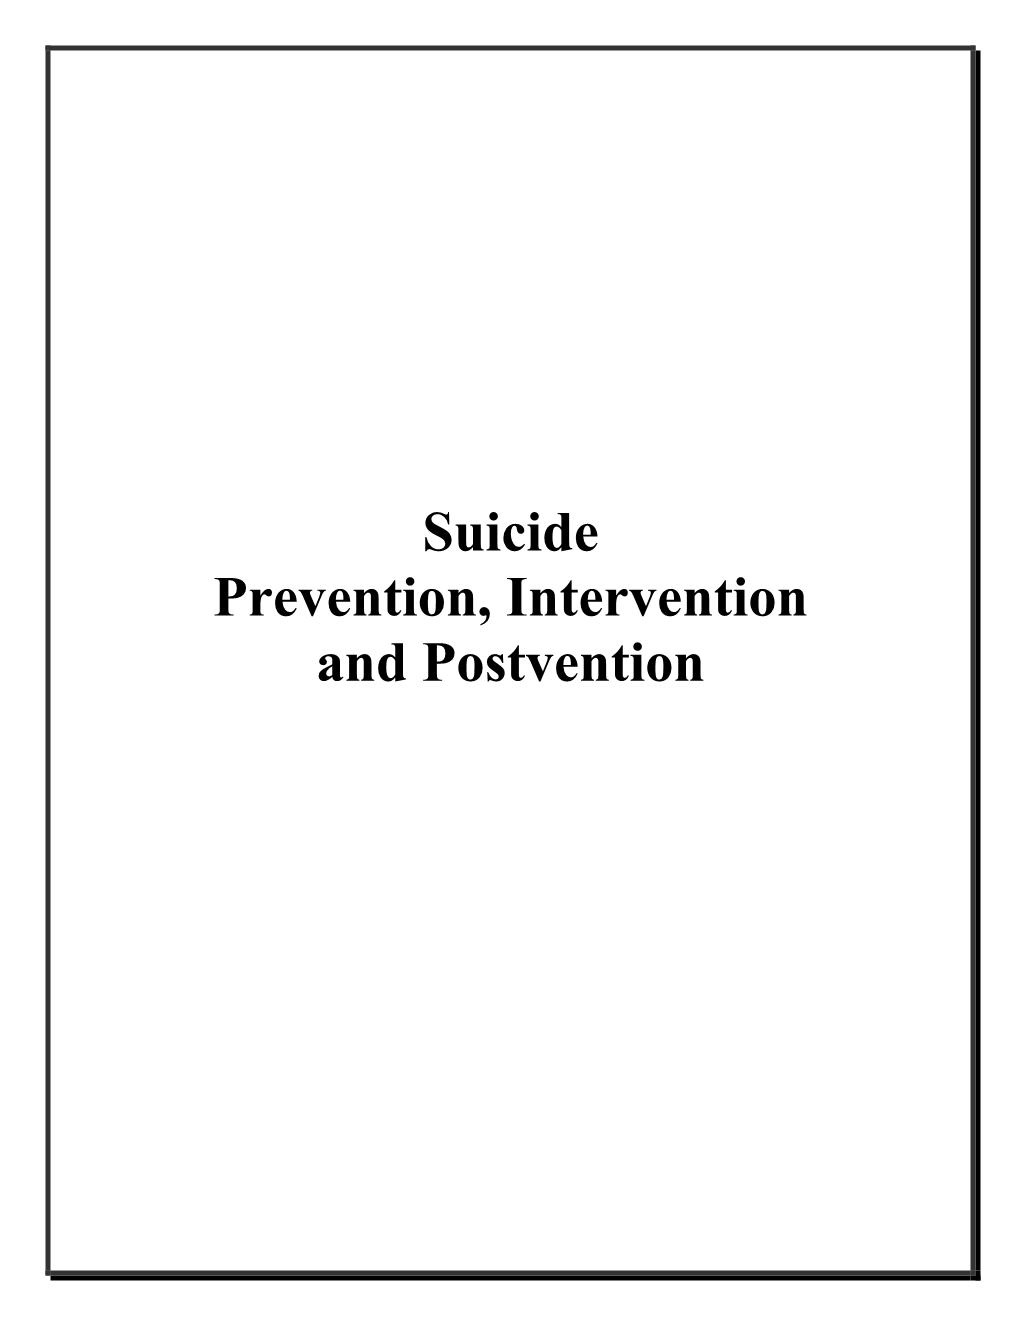 Suicide Prevention, Intervention and Postvention